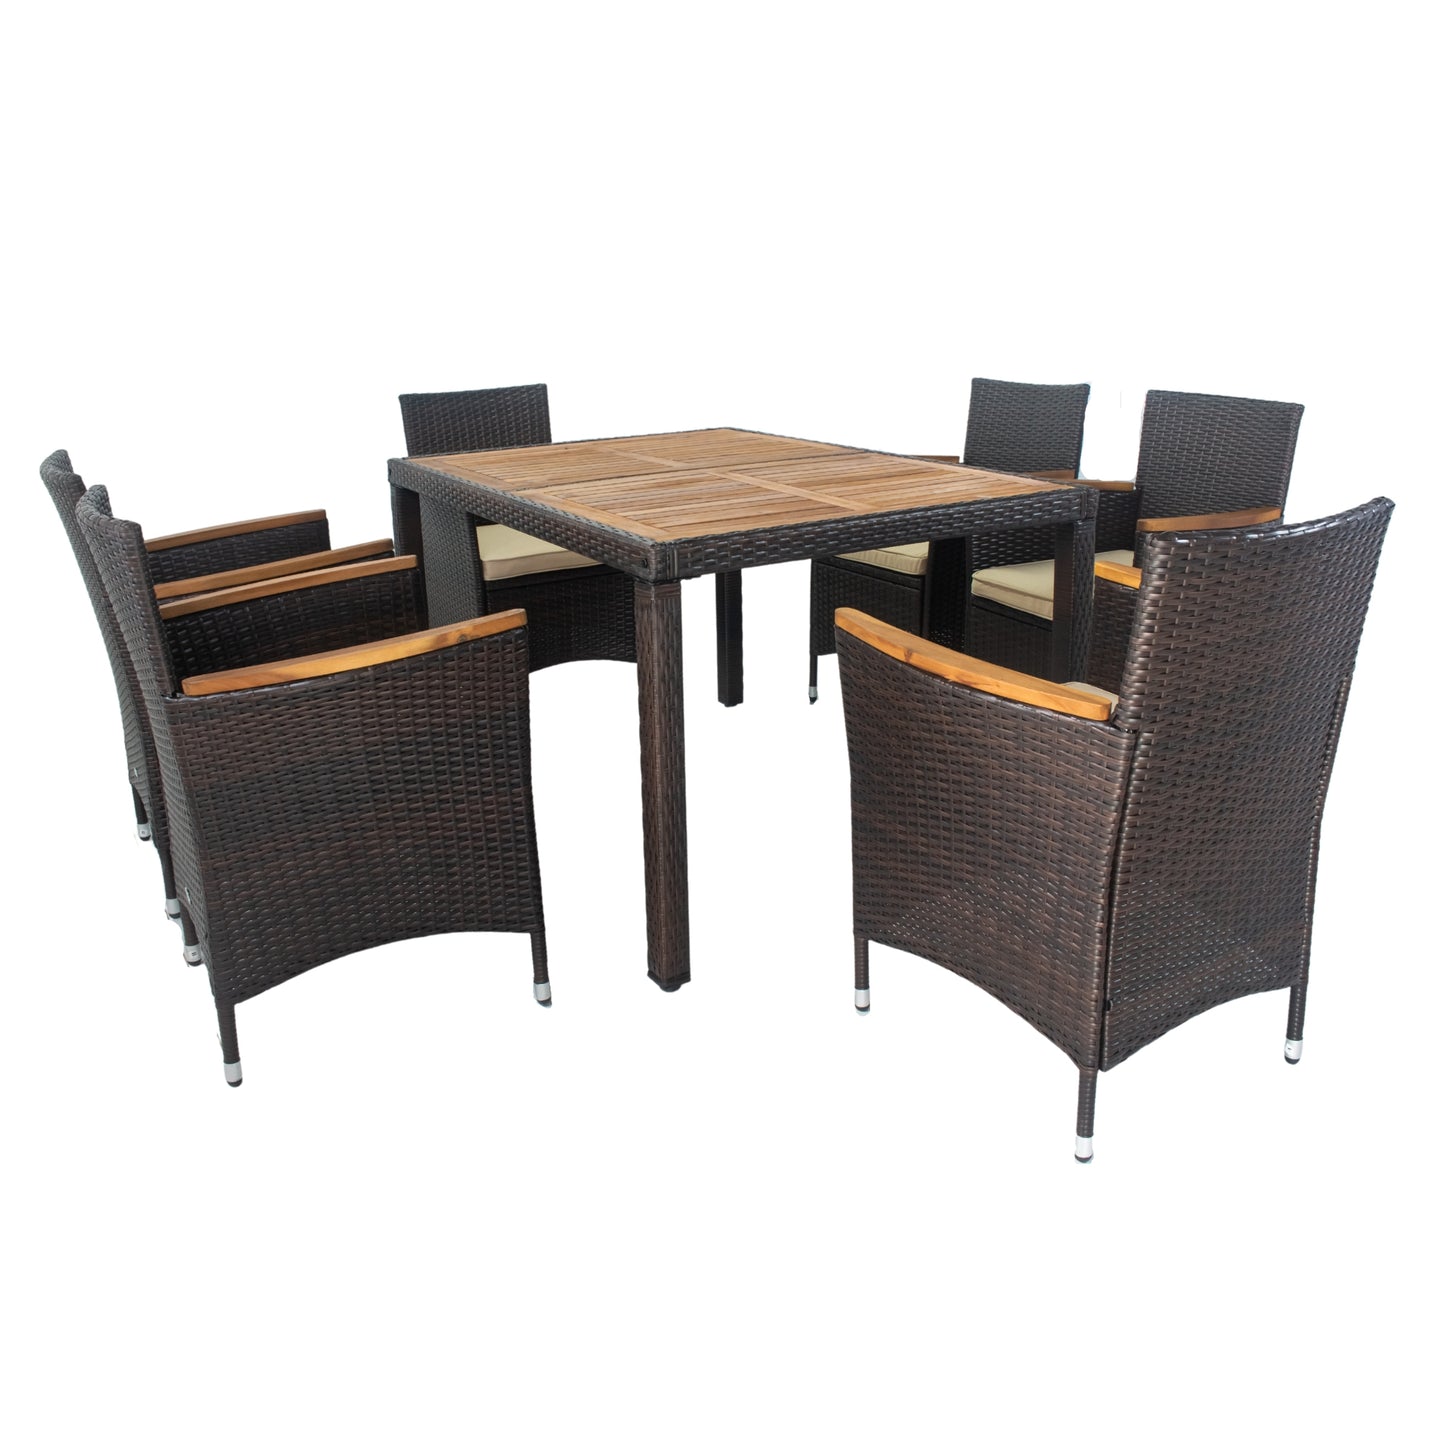 7 piece Outdoor Patio Wicker Dining Set Patio Wicker Furniture Dining Set w/Acacia Wood Top (Brown)